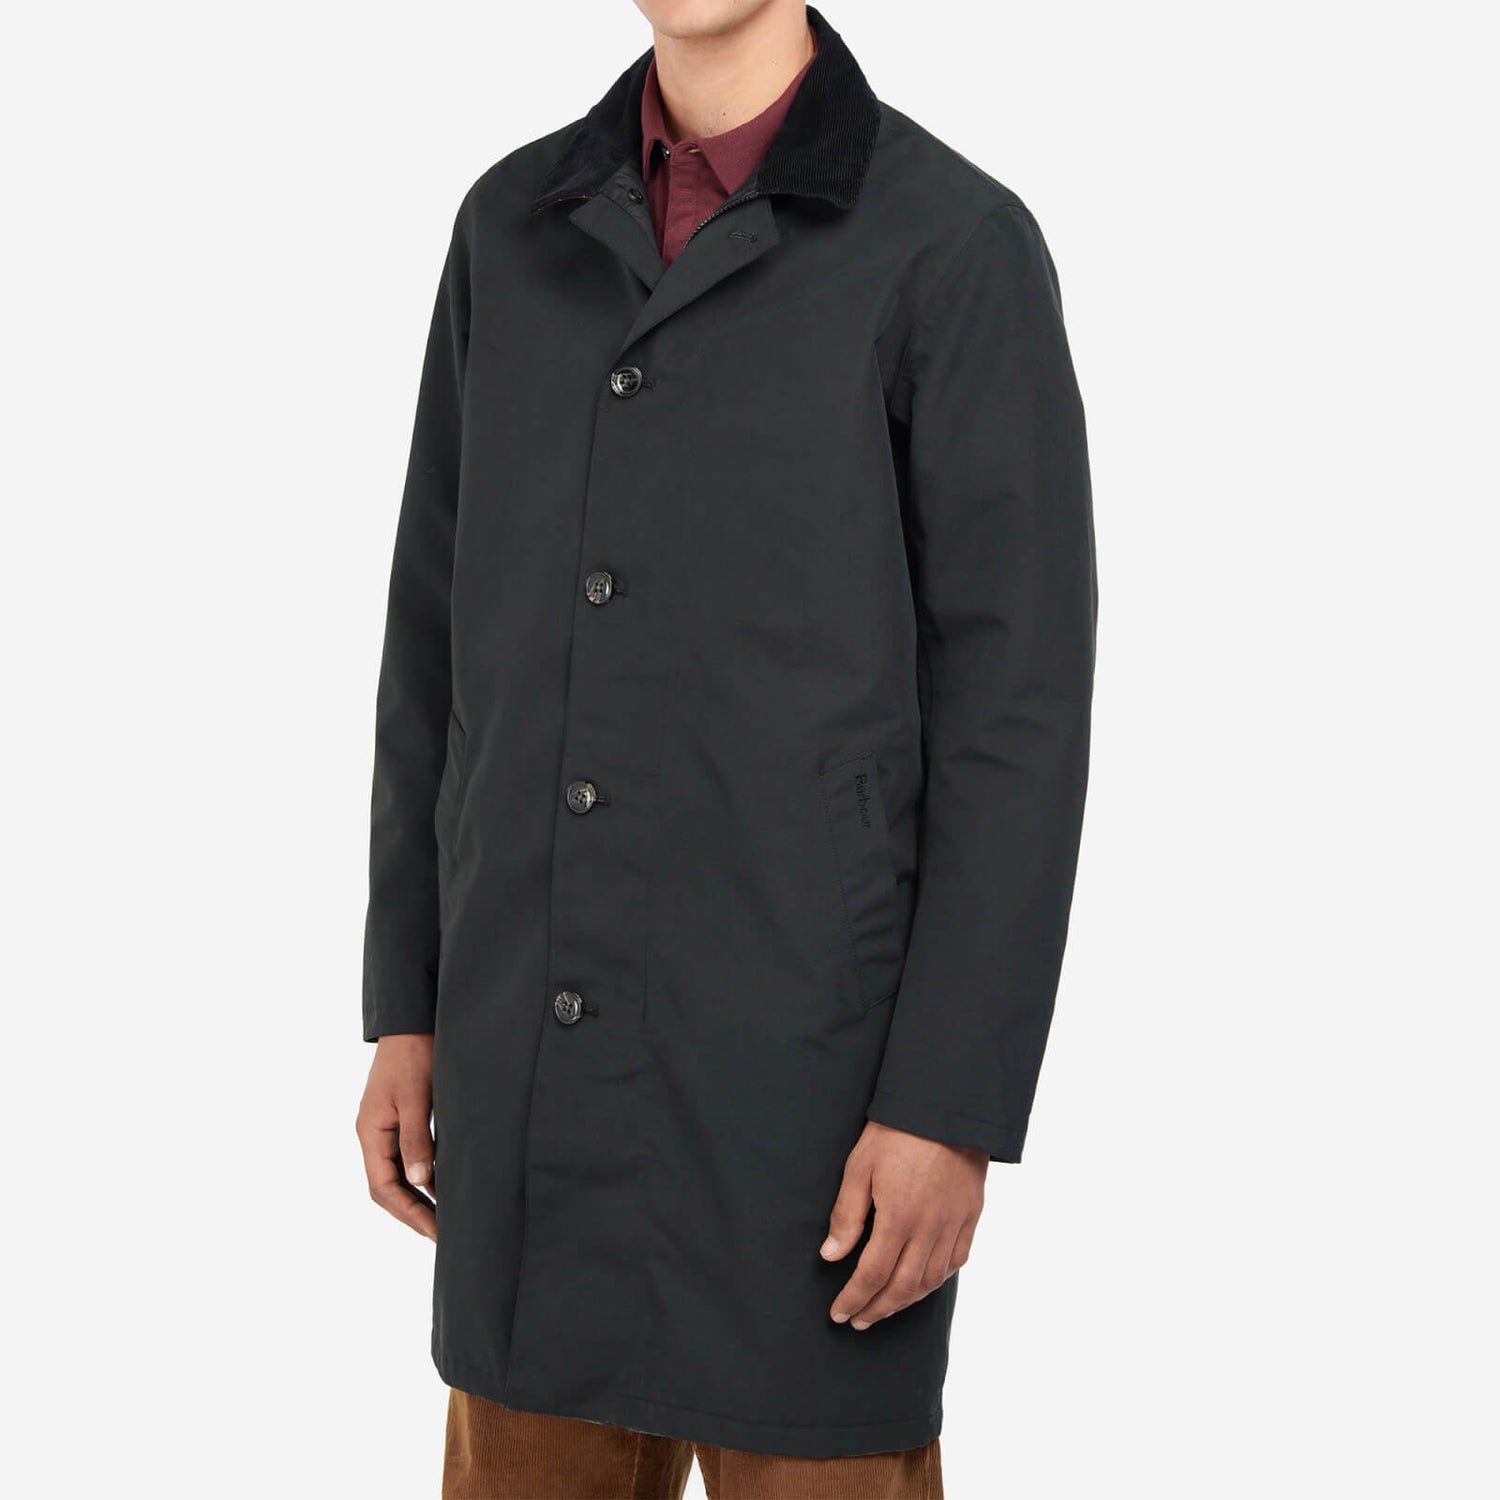 Barbour Forster Twill Jacket | TheHut.com